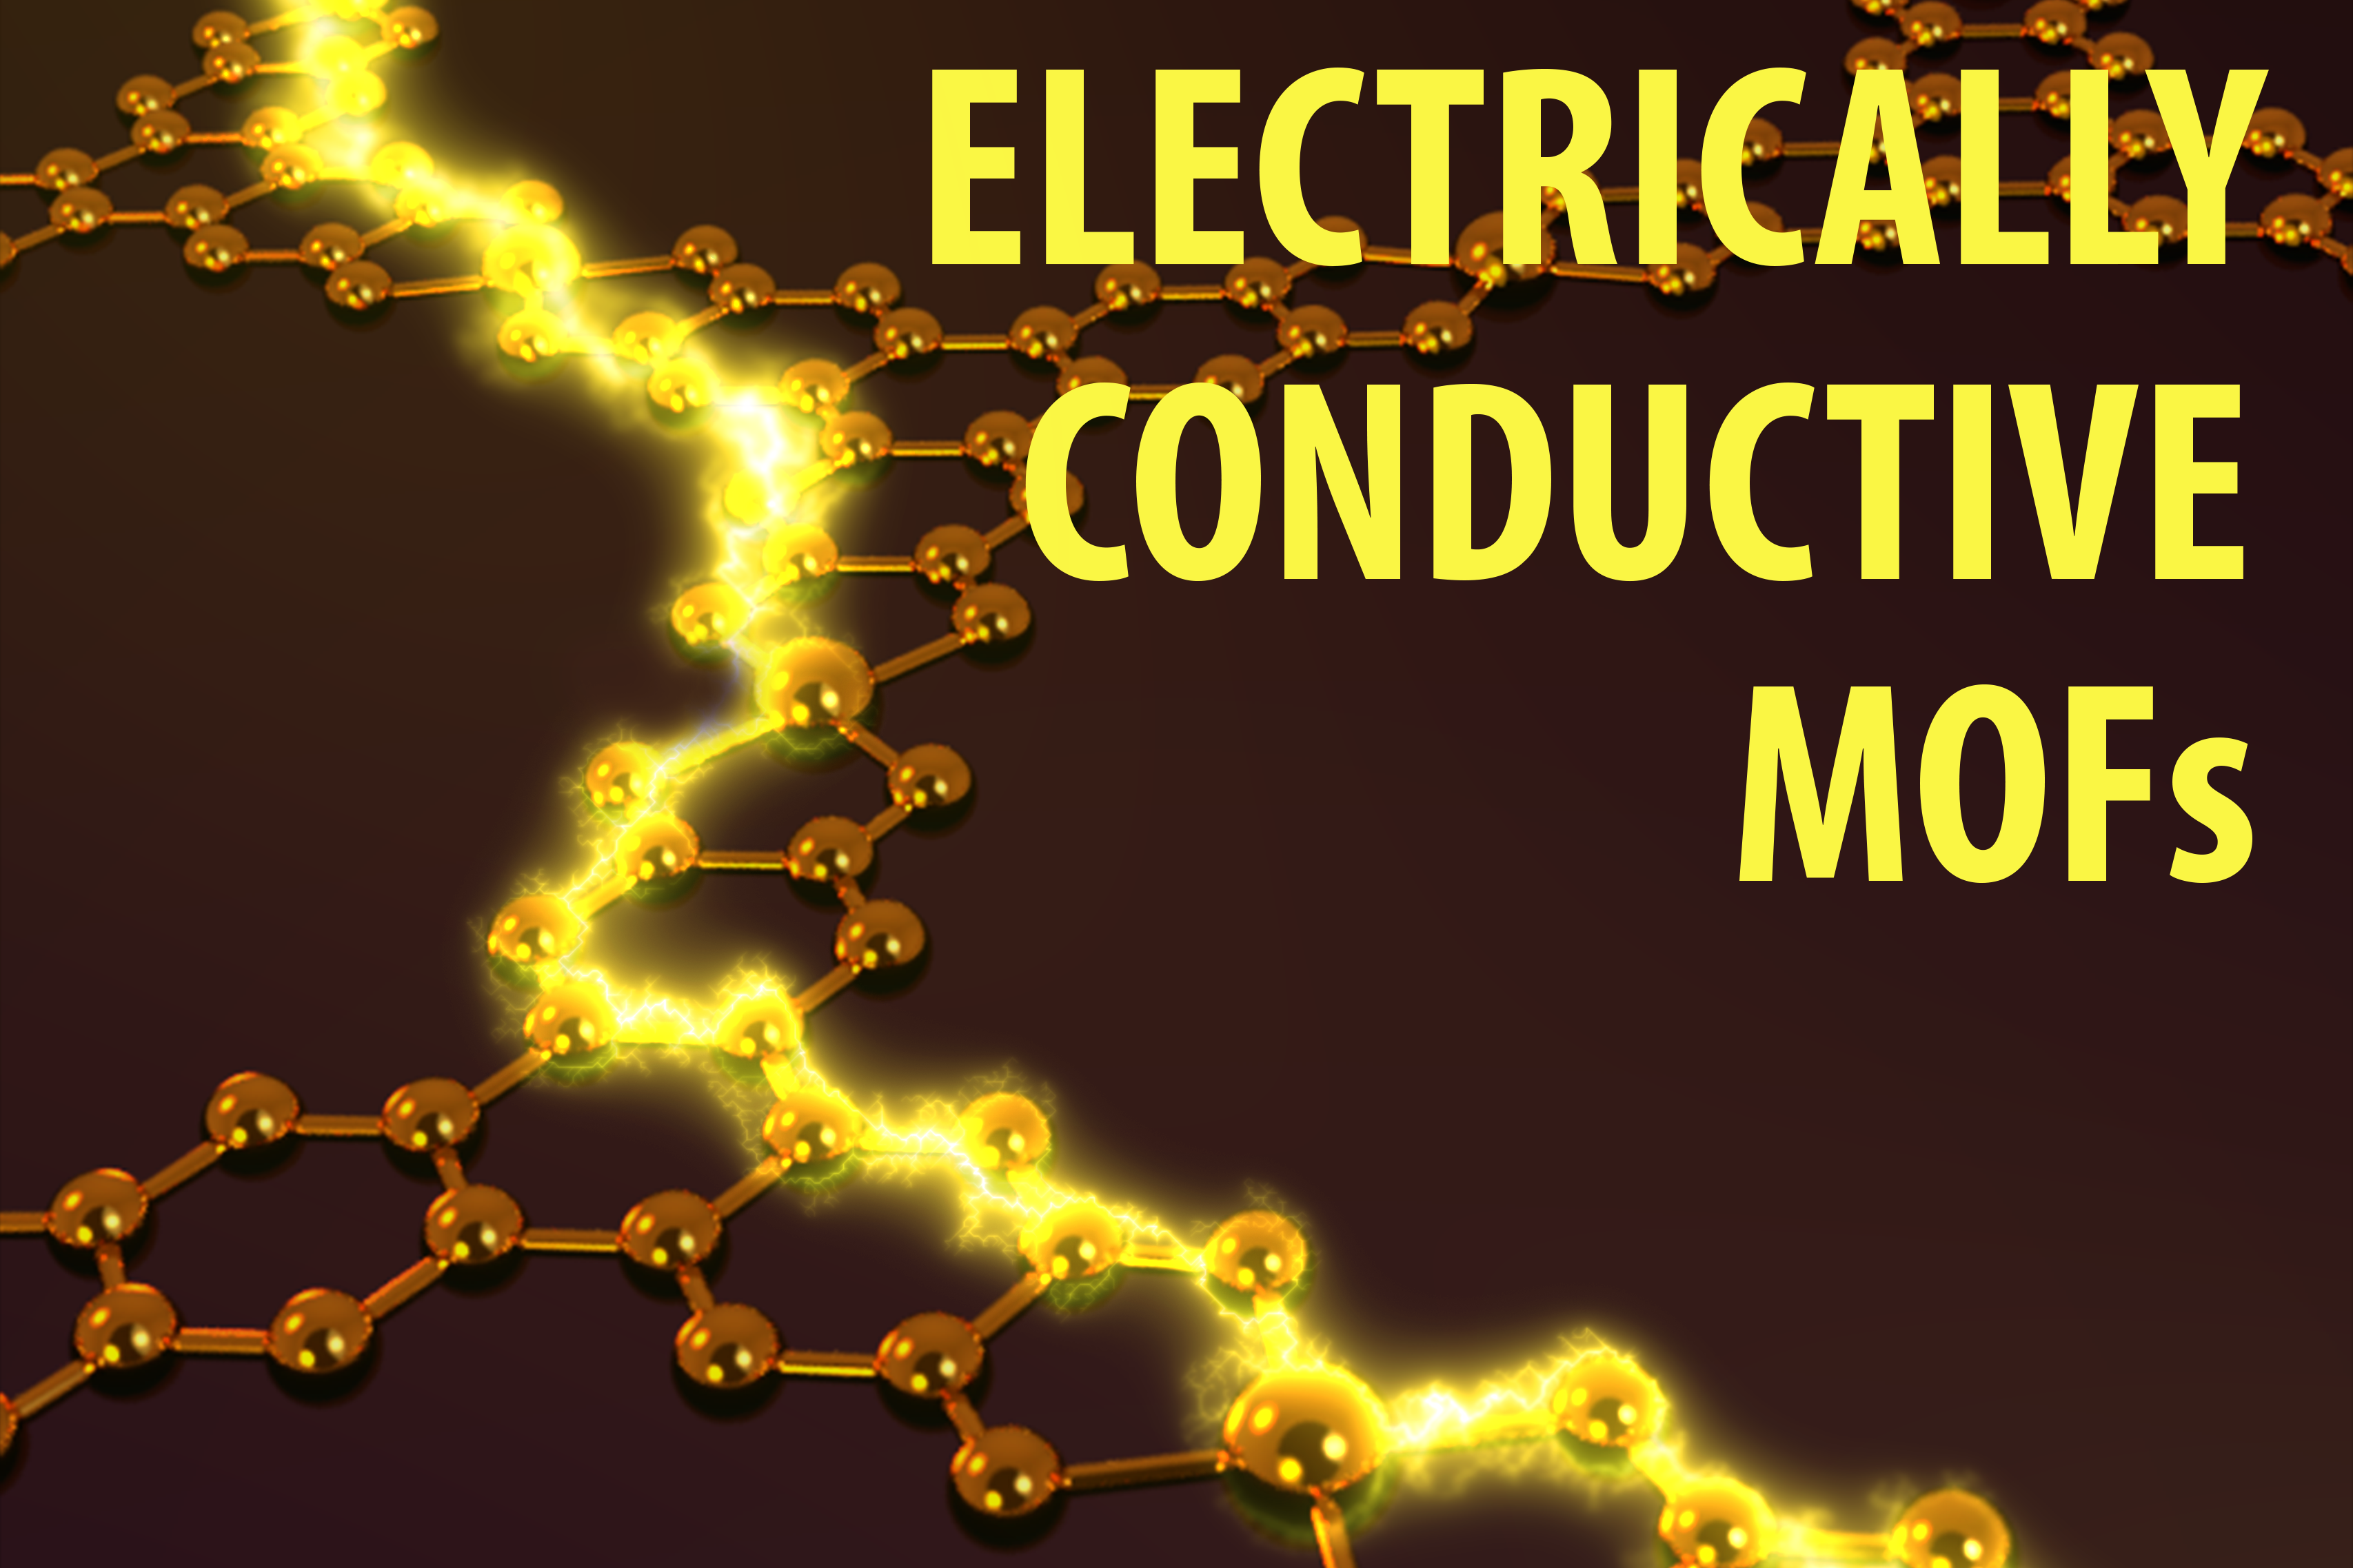 Electrical conductivity in MOFs